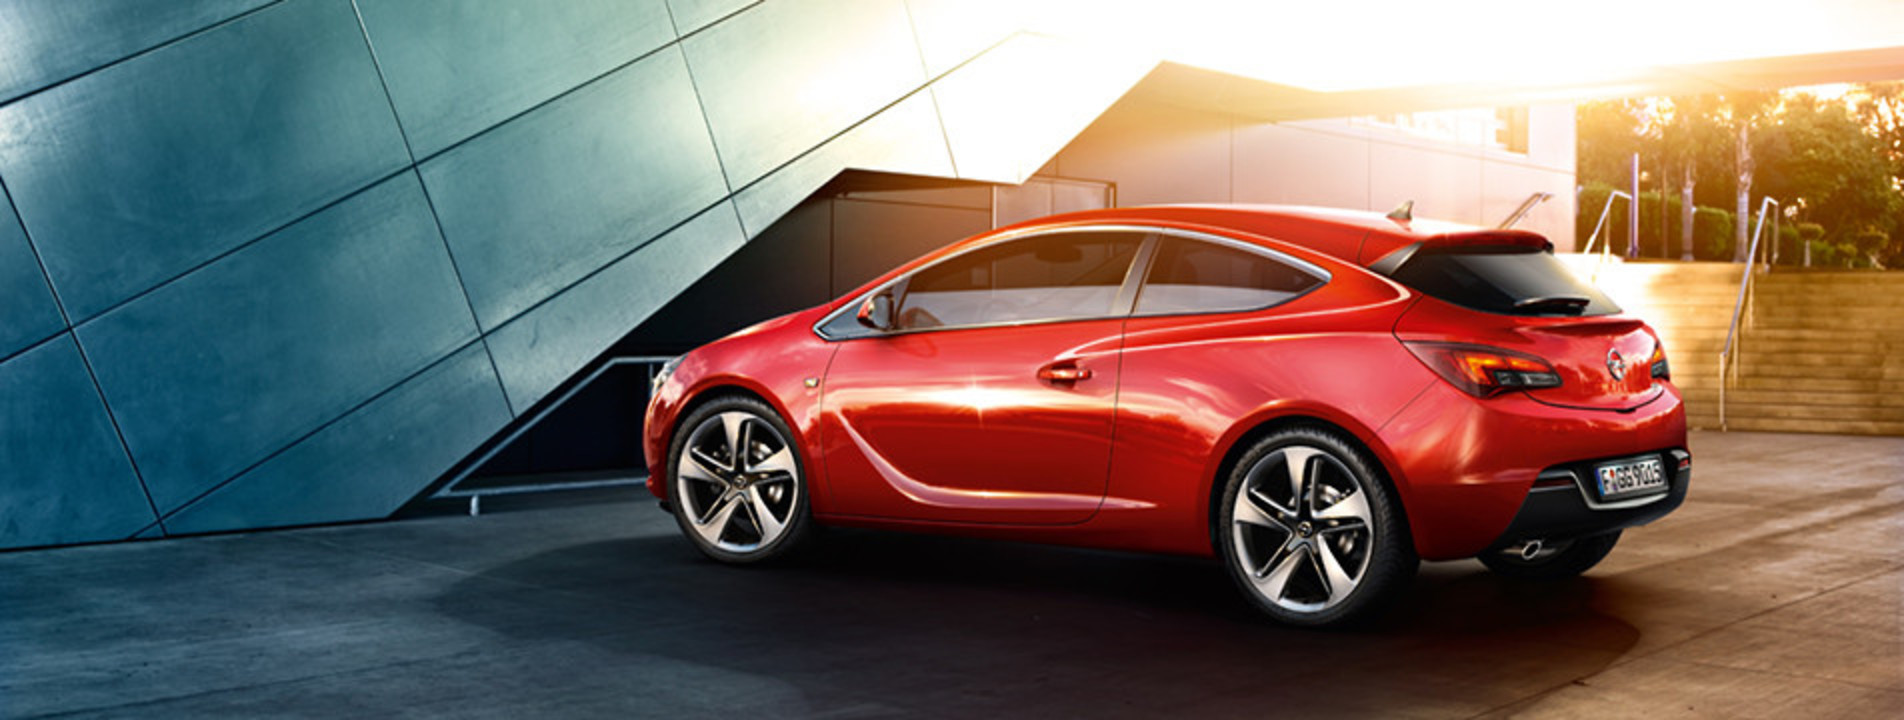 Opel Astra 20 GL. View Download Wallpaper. 952x360. Comments